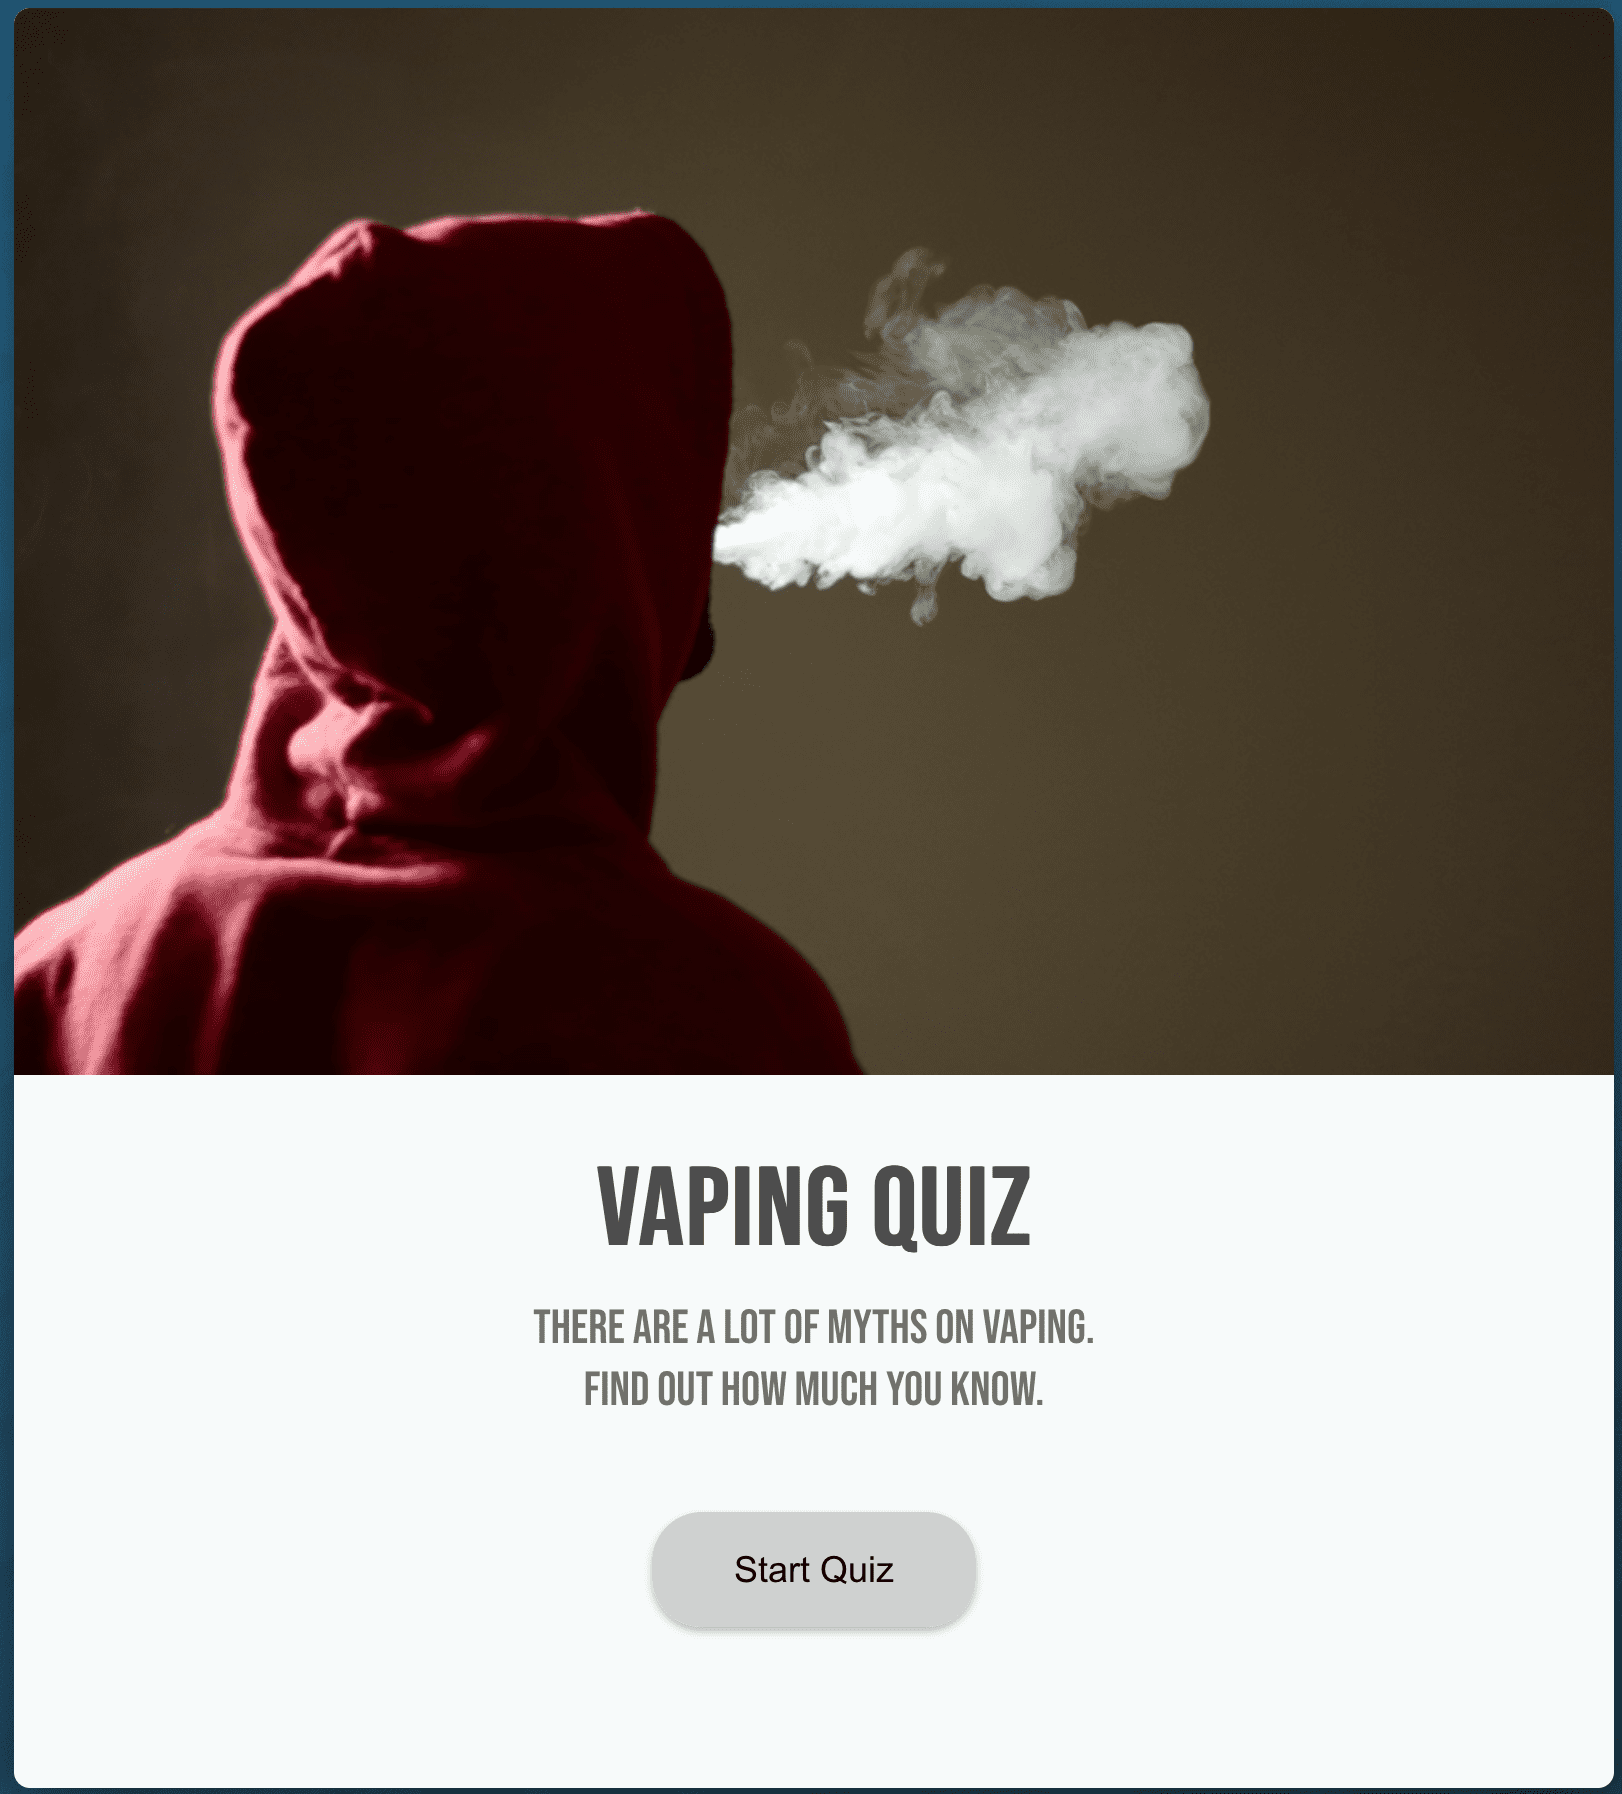 Vaping quiz - test your knowledge